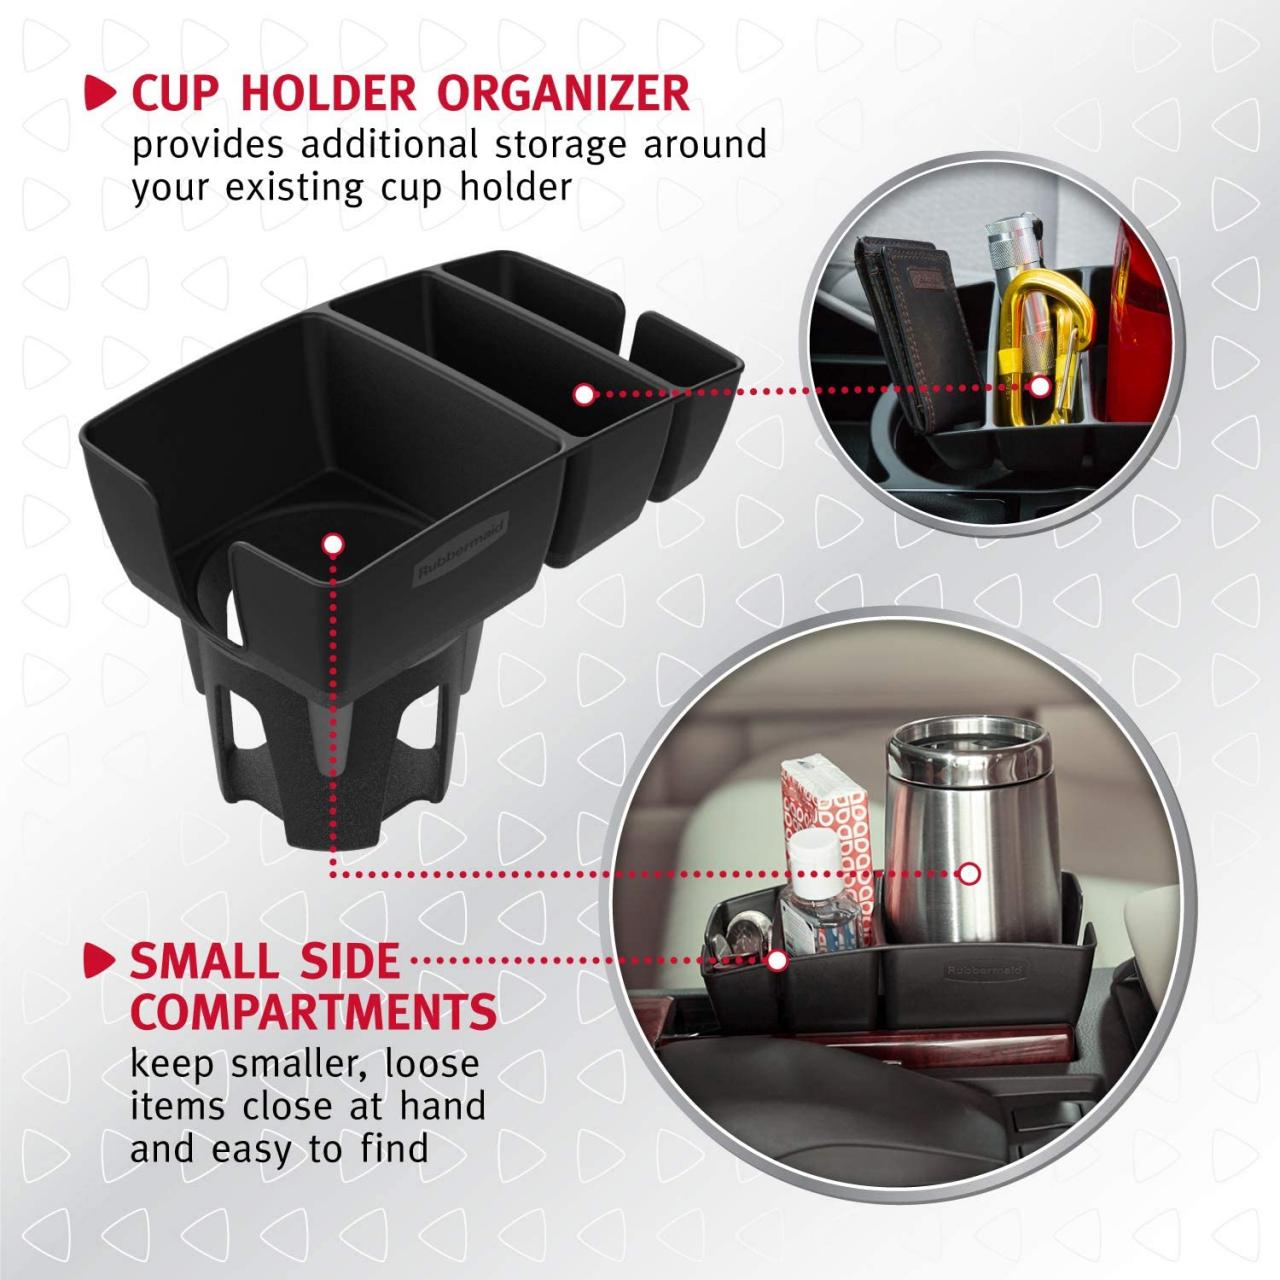 Rubbermaid Large Cup Holder Organizer by Rubbermaid at Fleet Farm